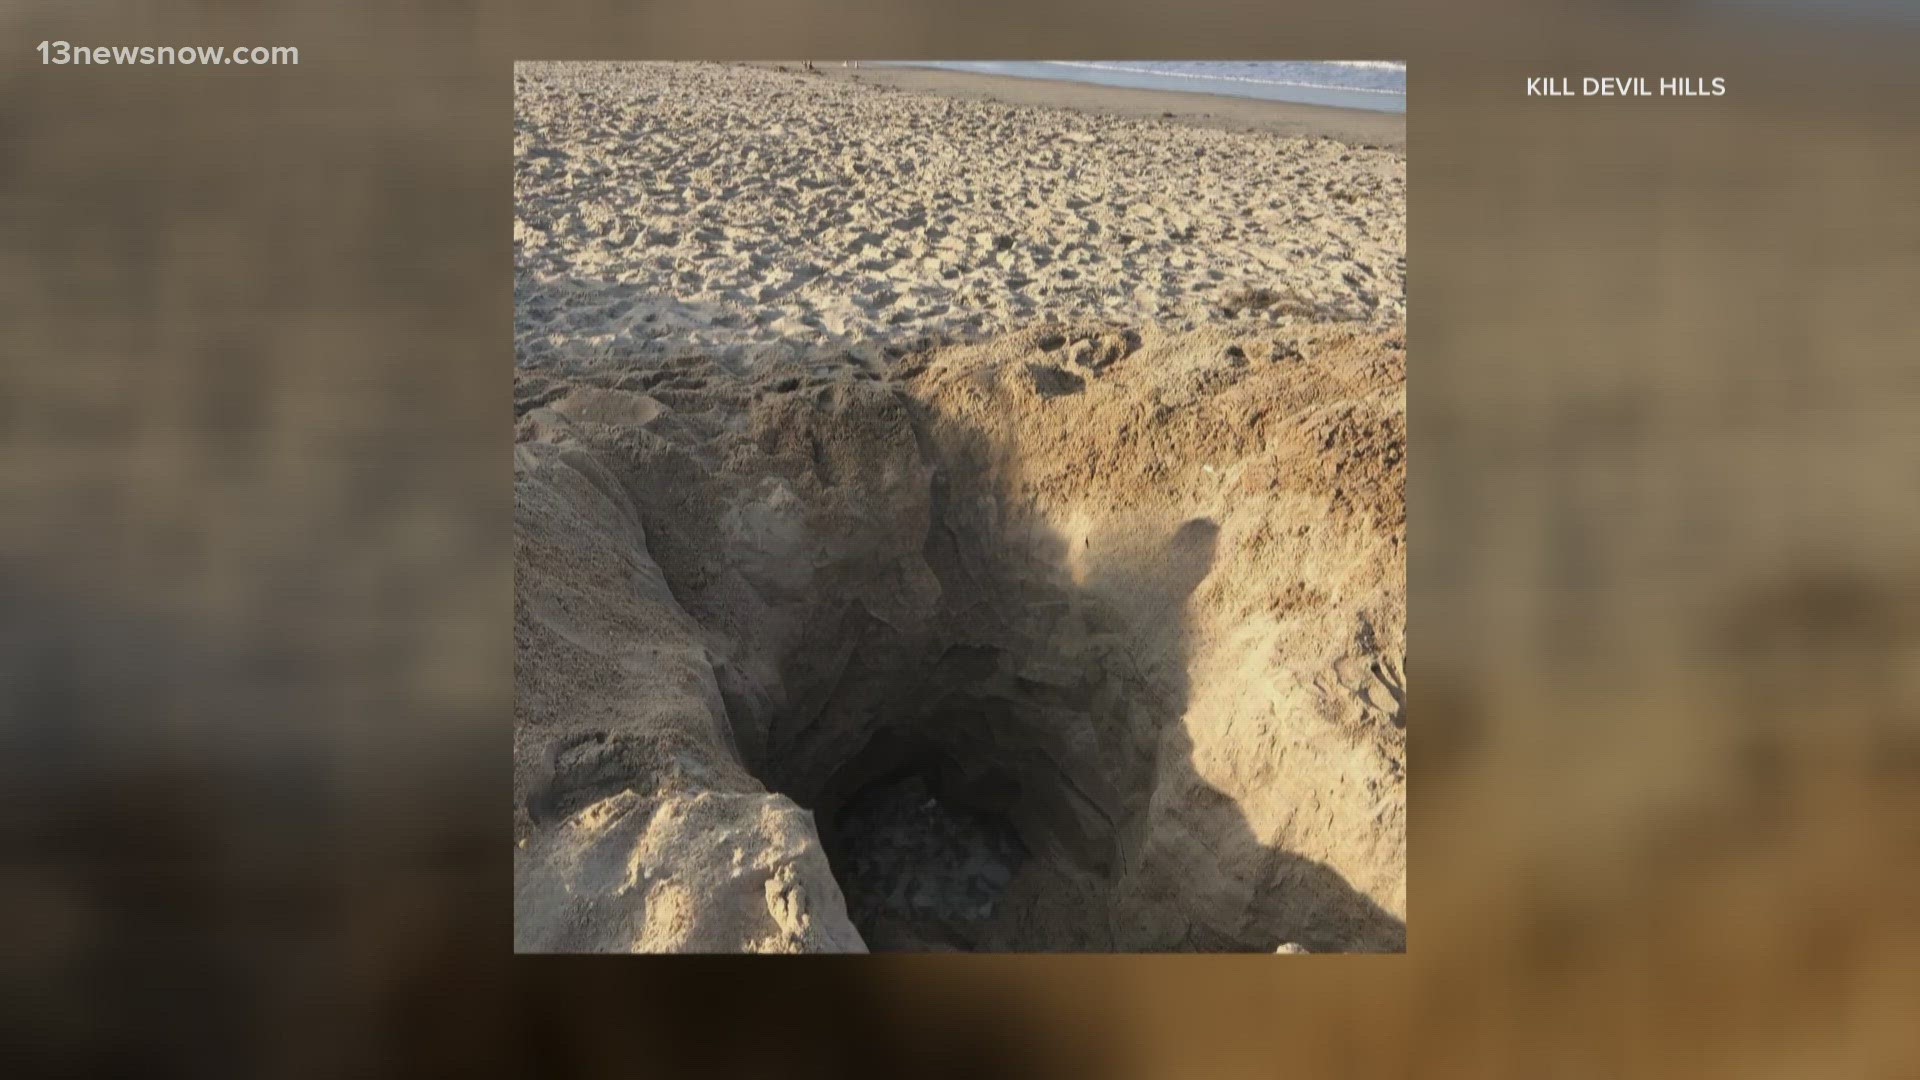 Town officials said crews responded to fill in three large, unattended holes in a single day.